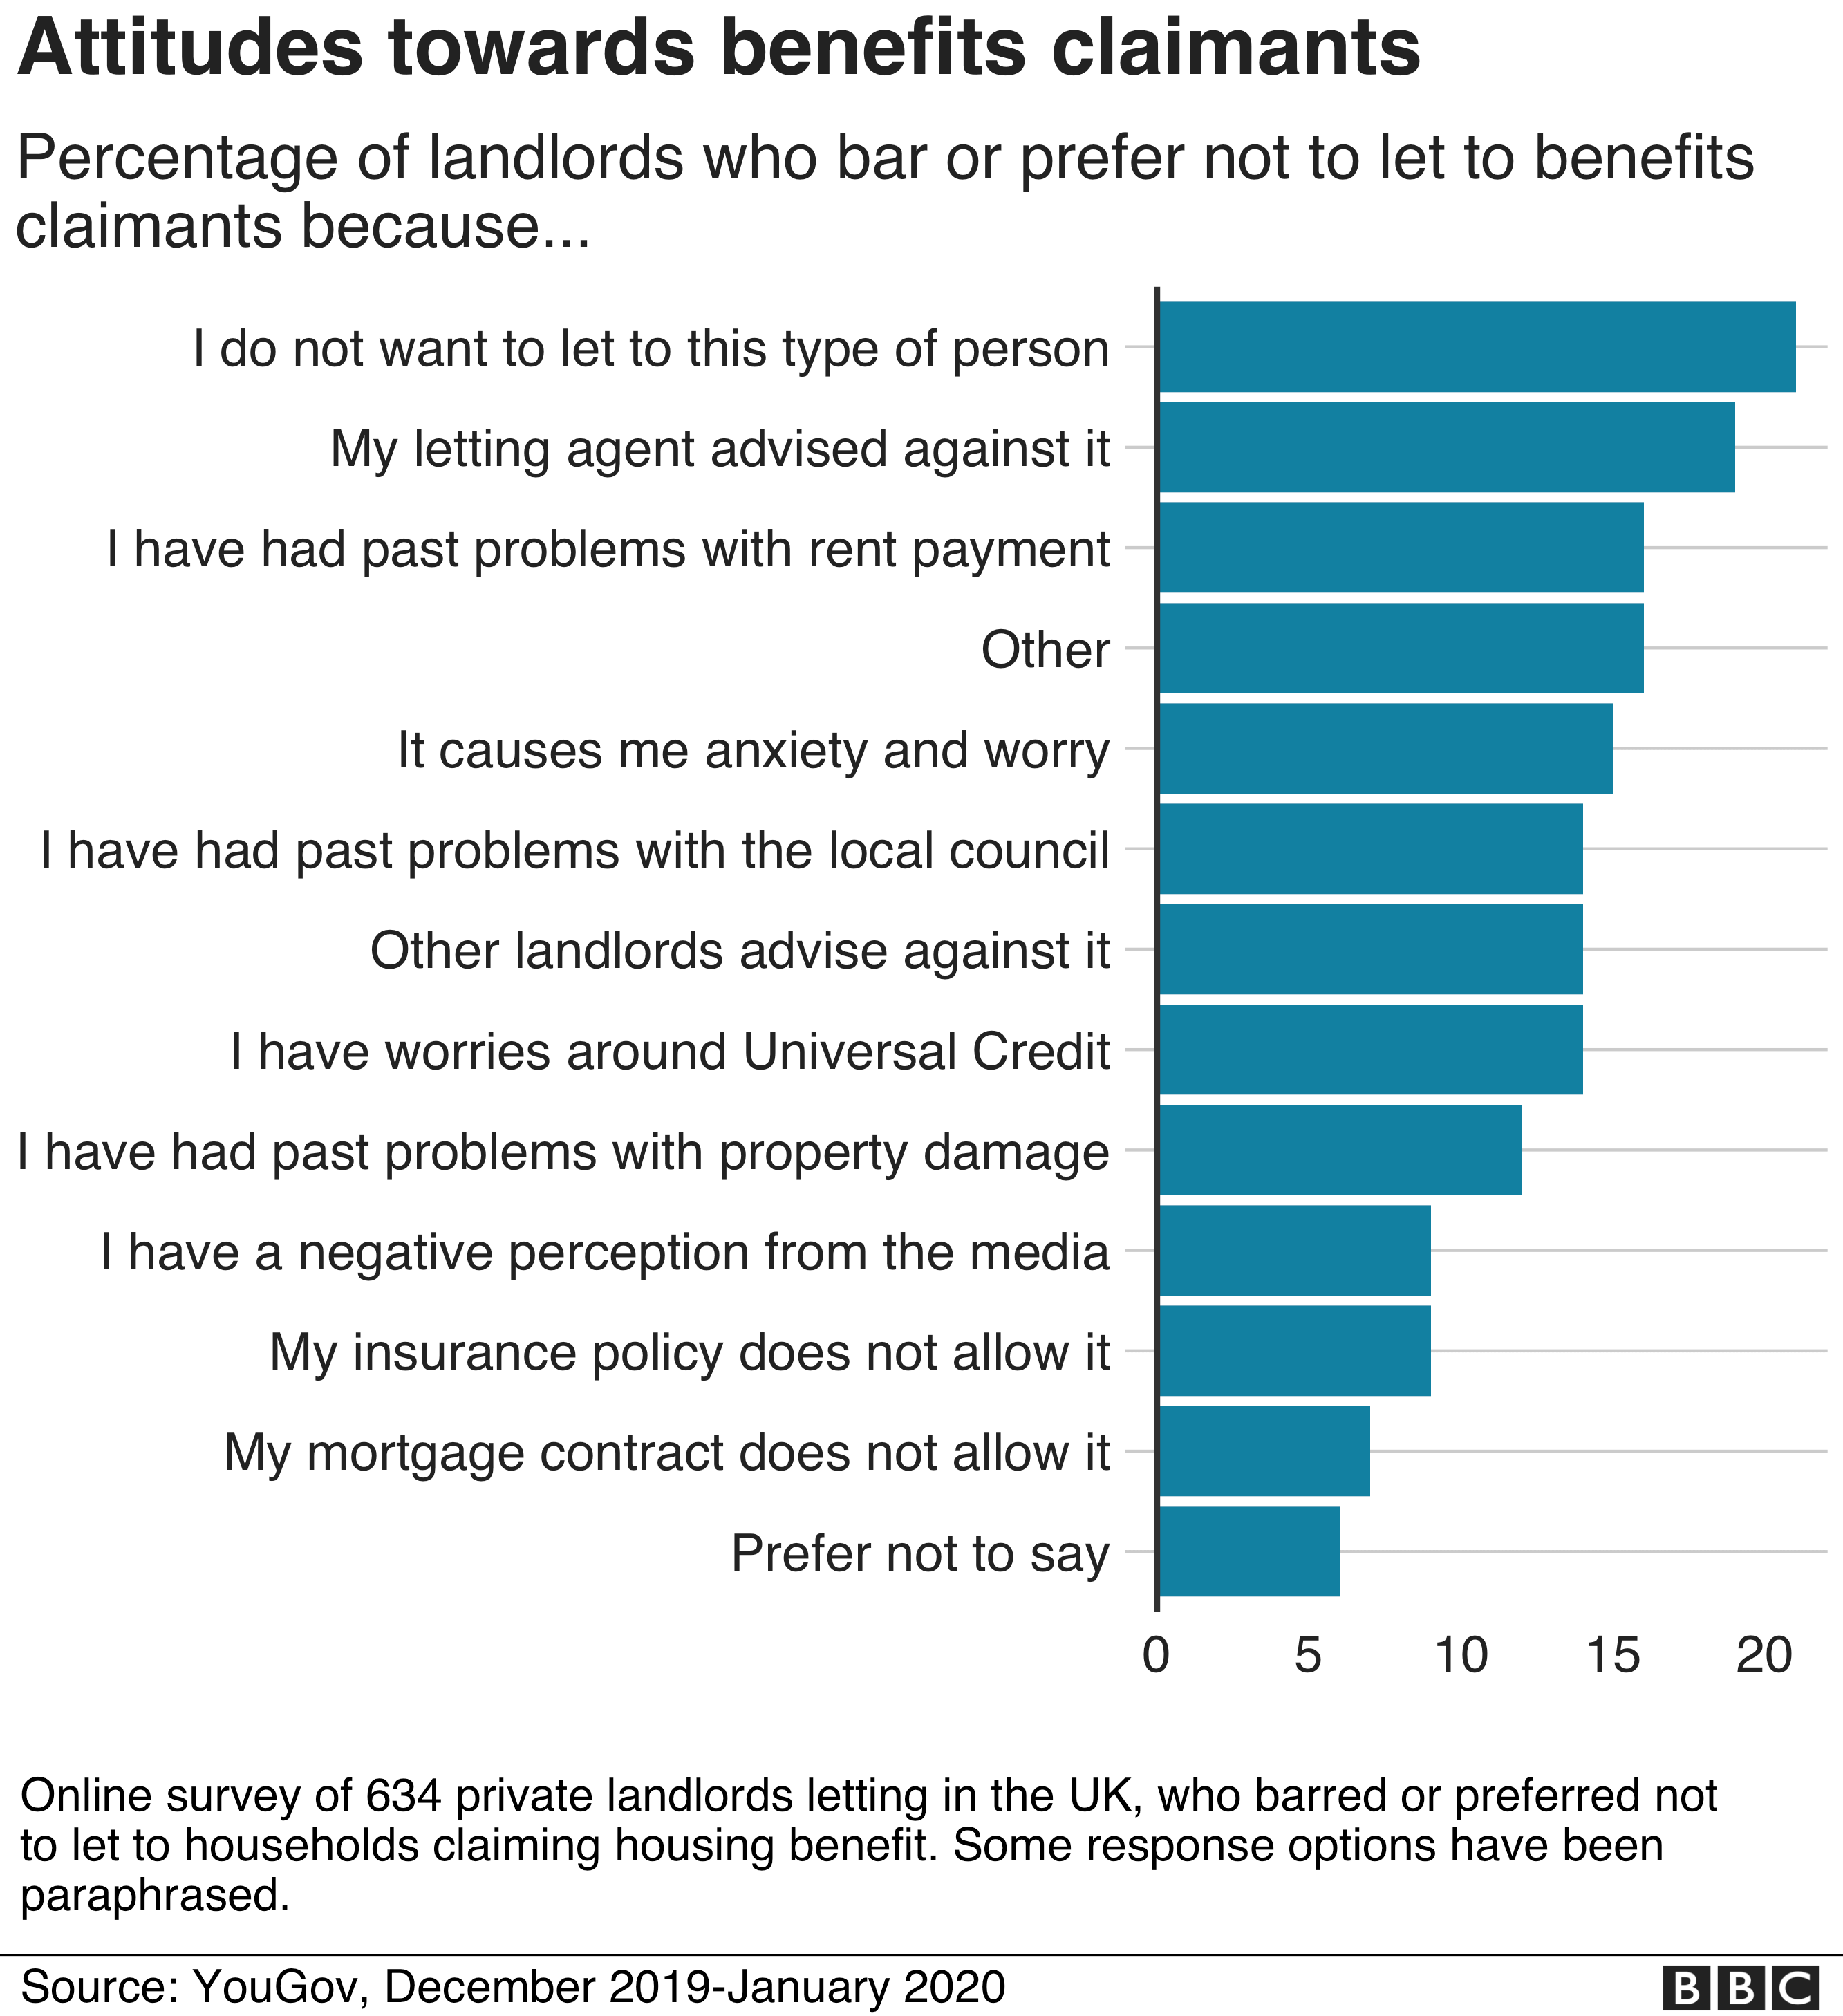 Bar chart showing the different reasons landlords do not rent to benefits claimants. The most common reason is 'I do not want to let to this type of person'